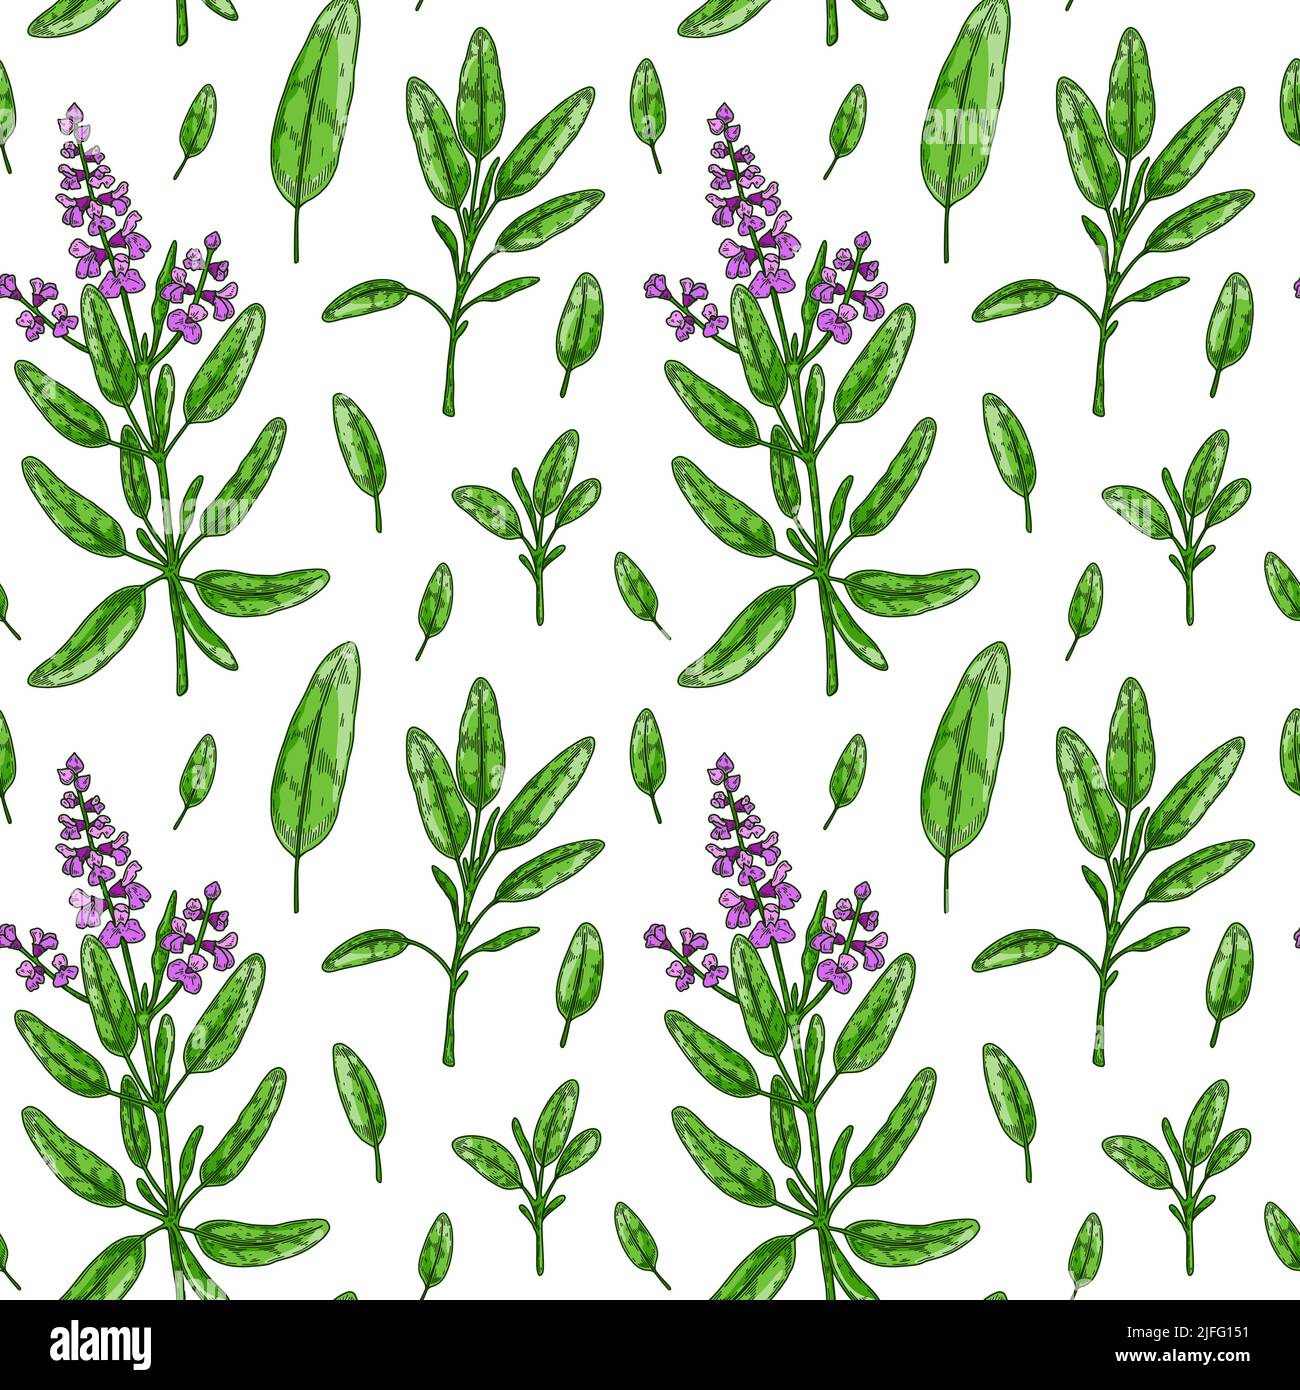 Seamless pattern with sage leaves and flowers. Hand drawn greens and leaf vegetables. Vector illustration in colored sketch style Stock Vector